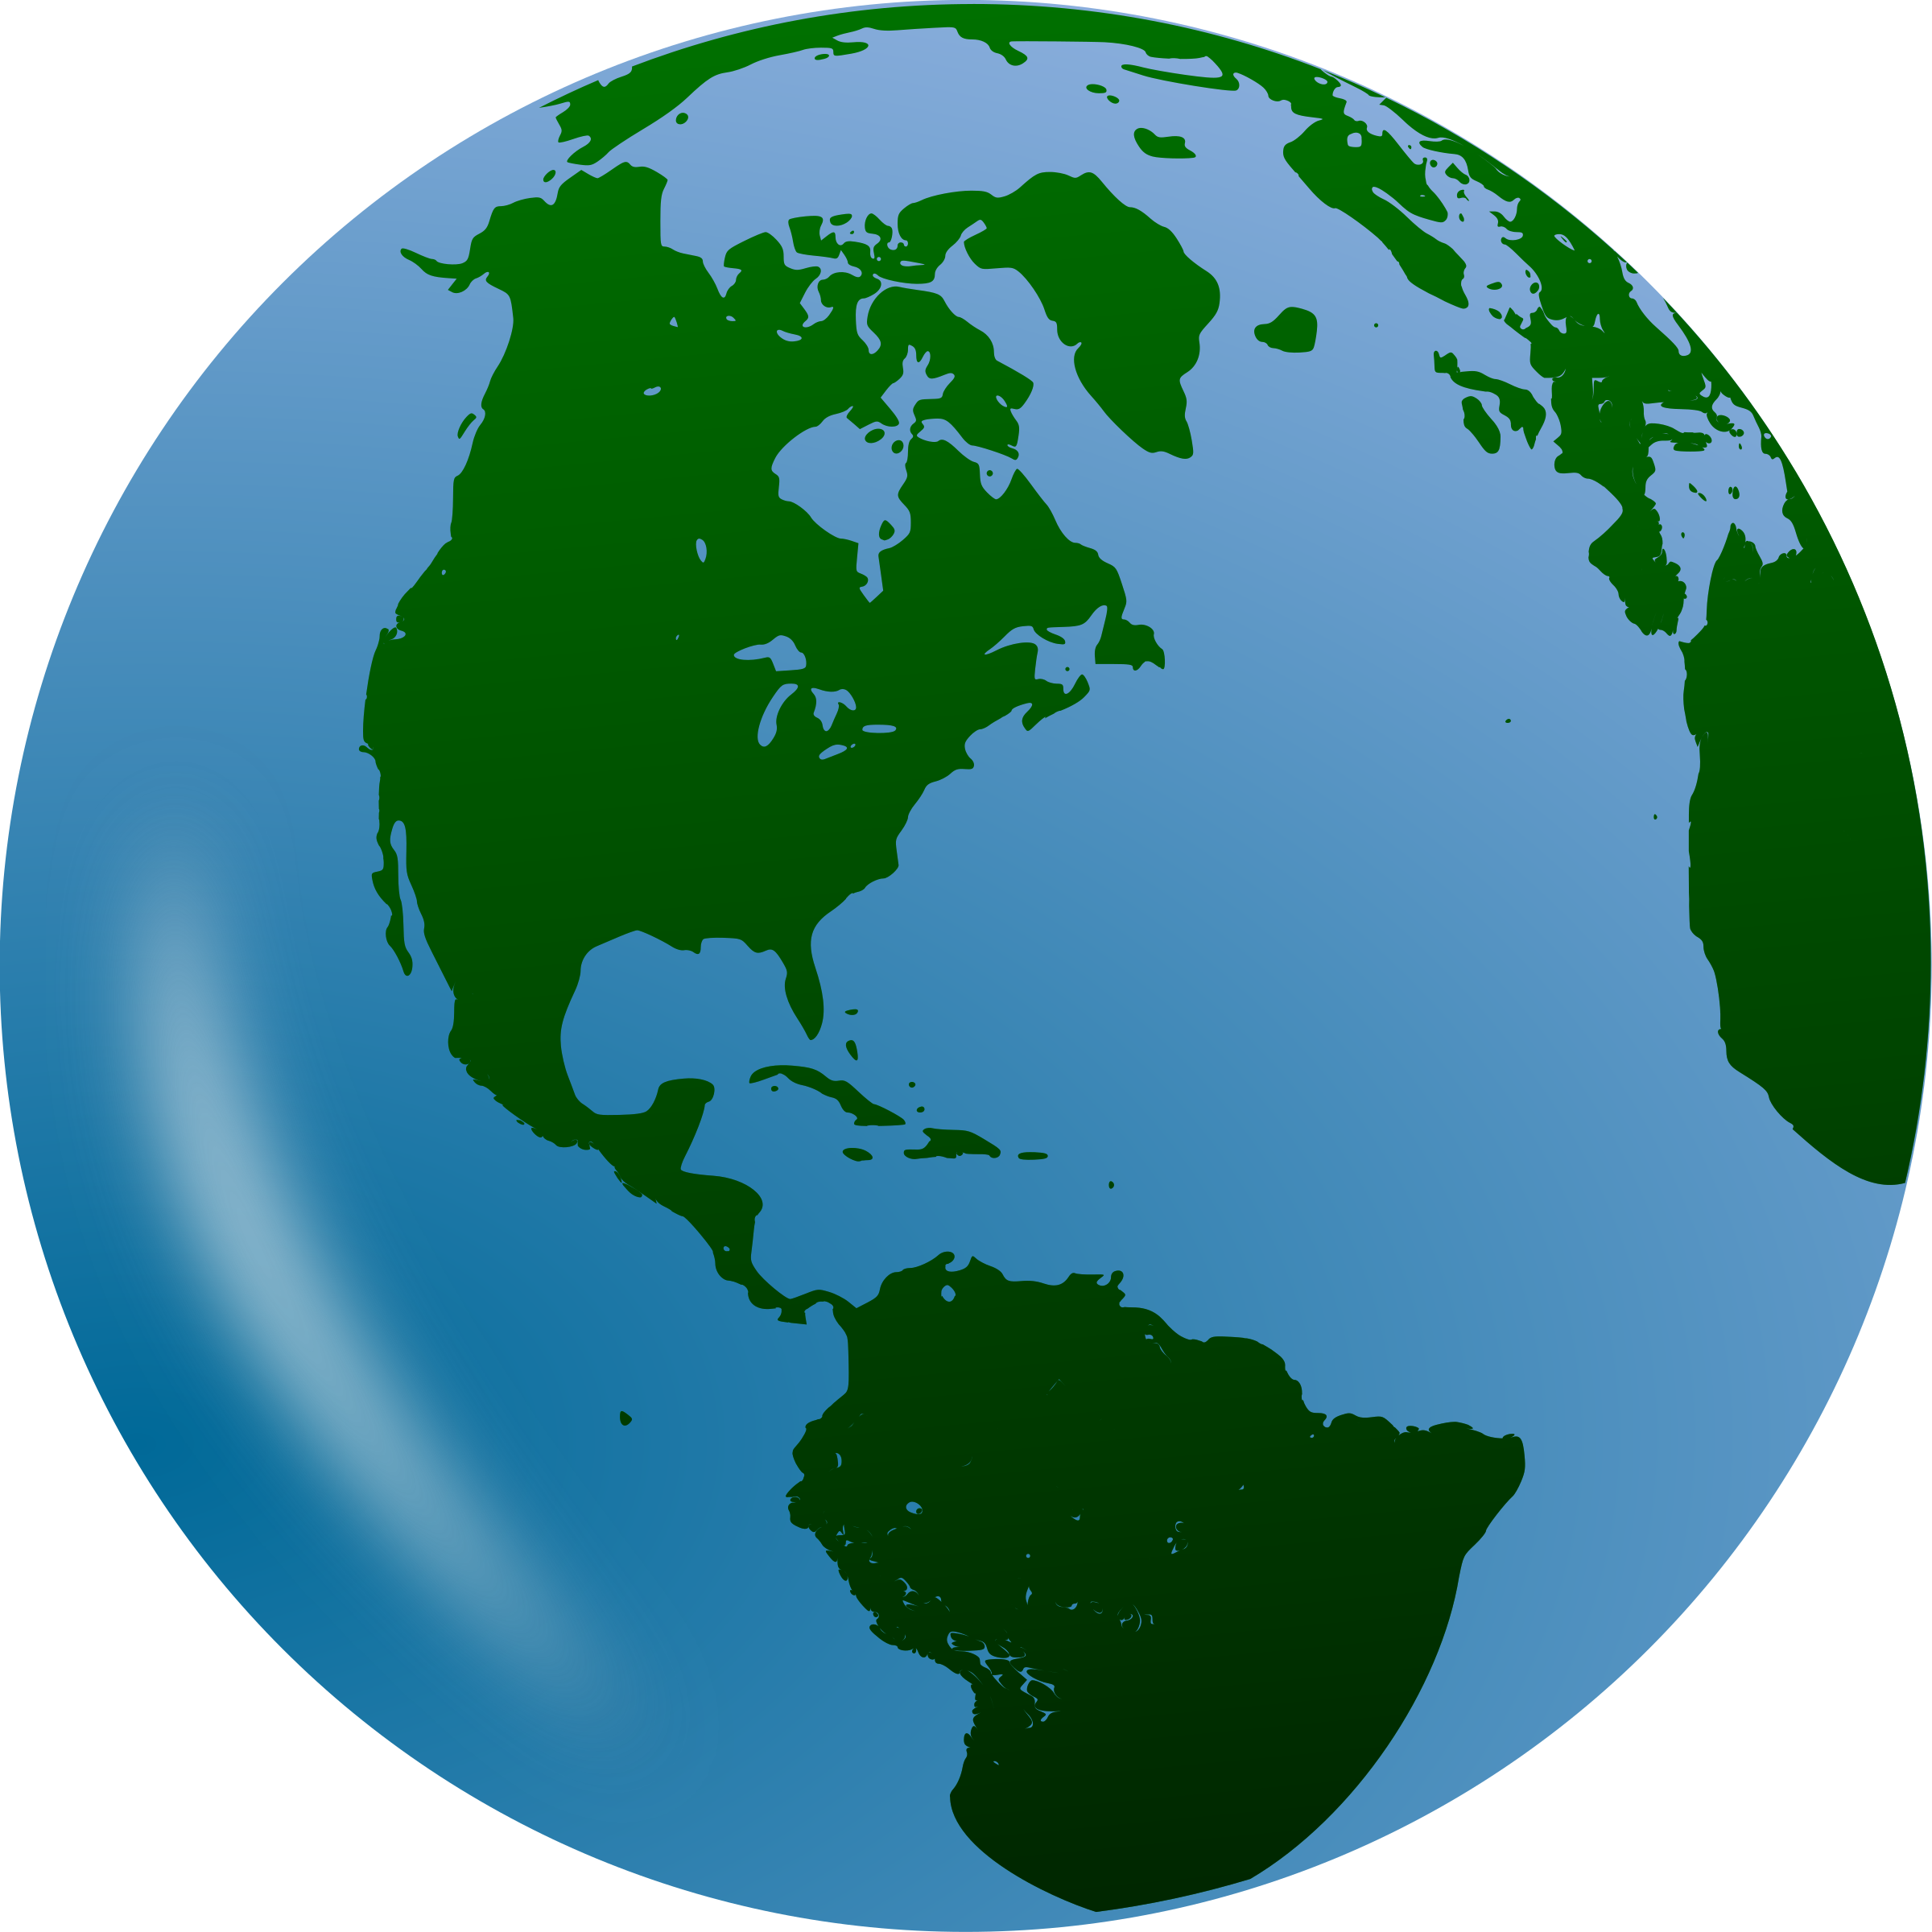 World clip art globe free clipart images 3 - Cliparting.com